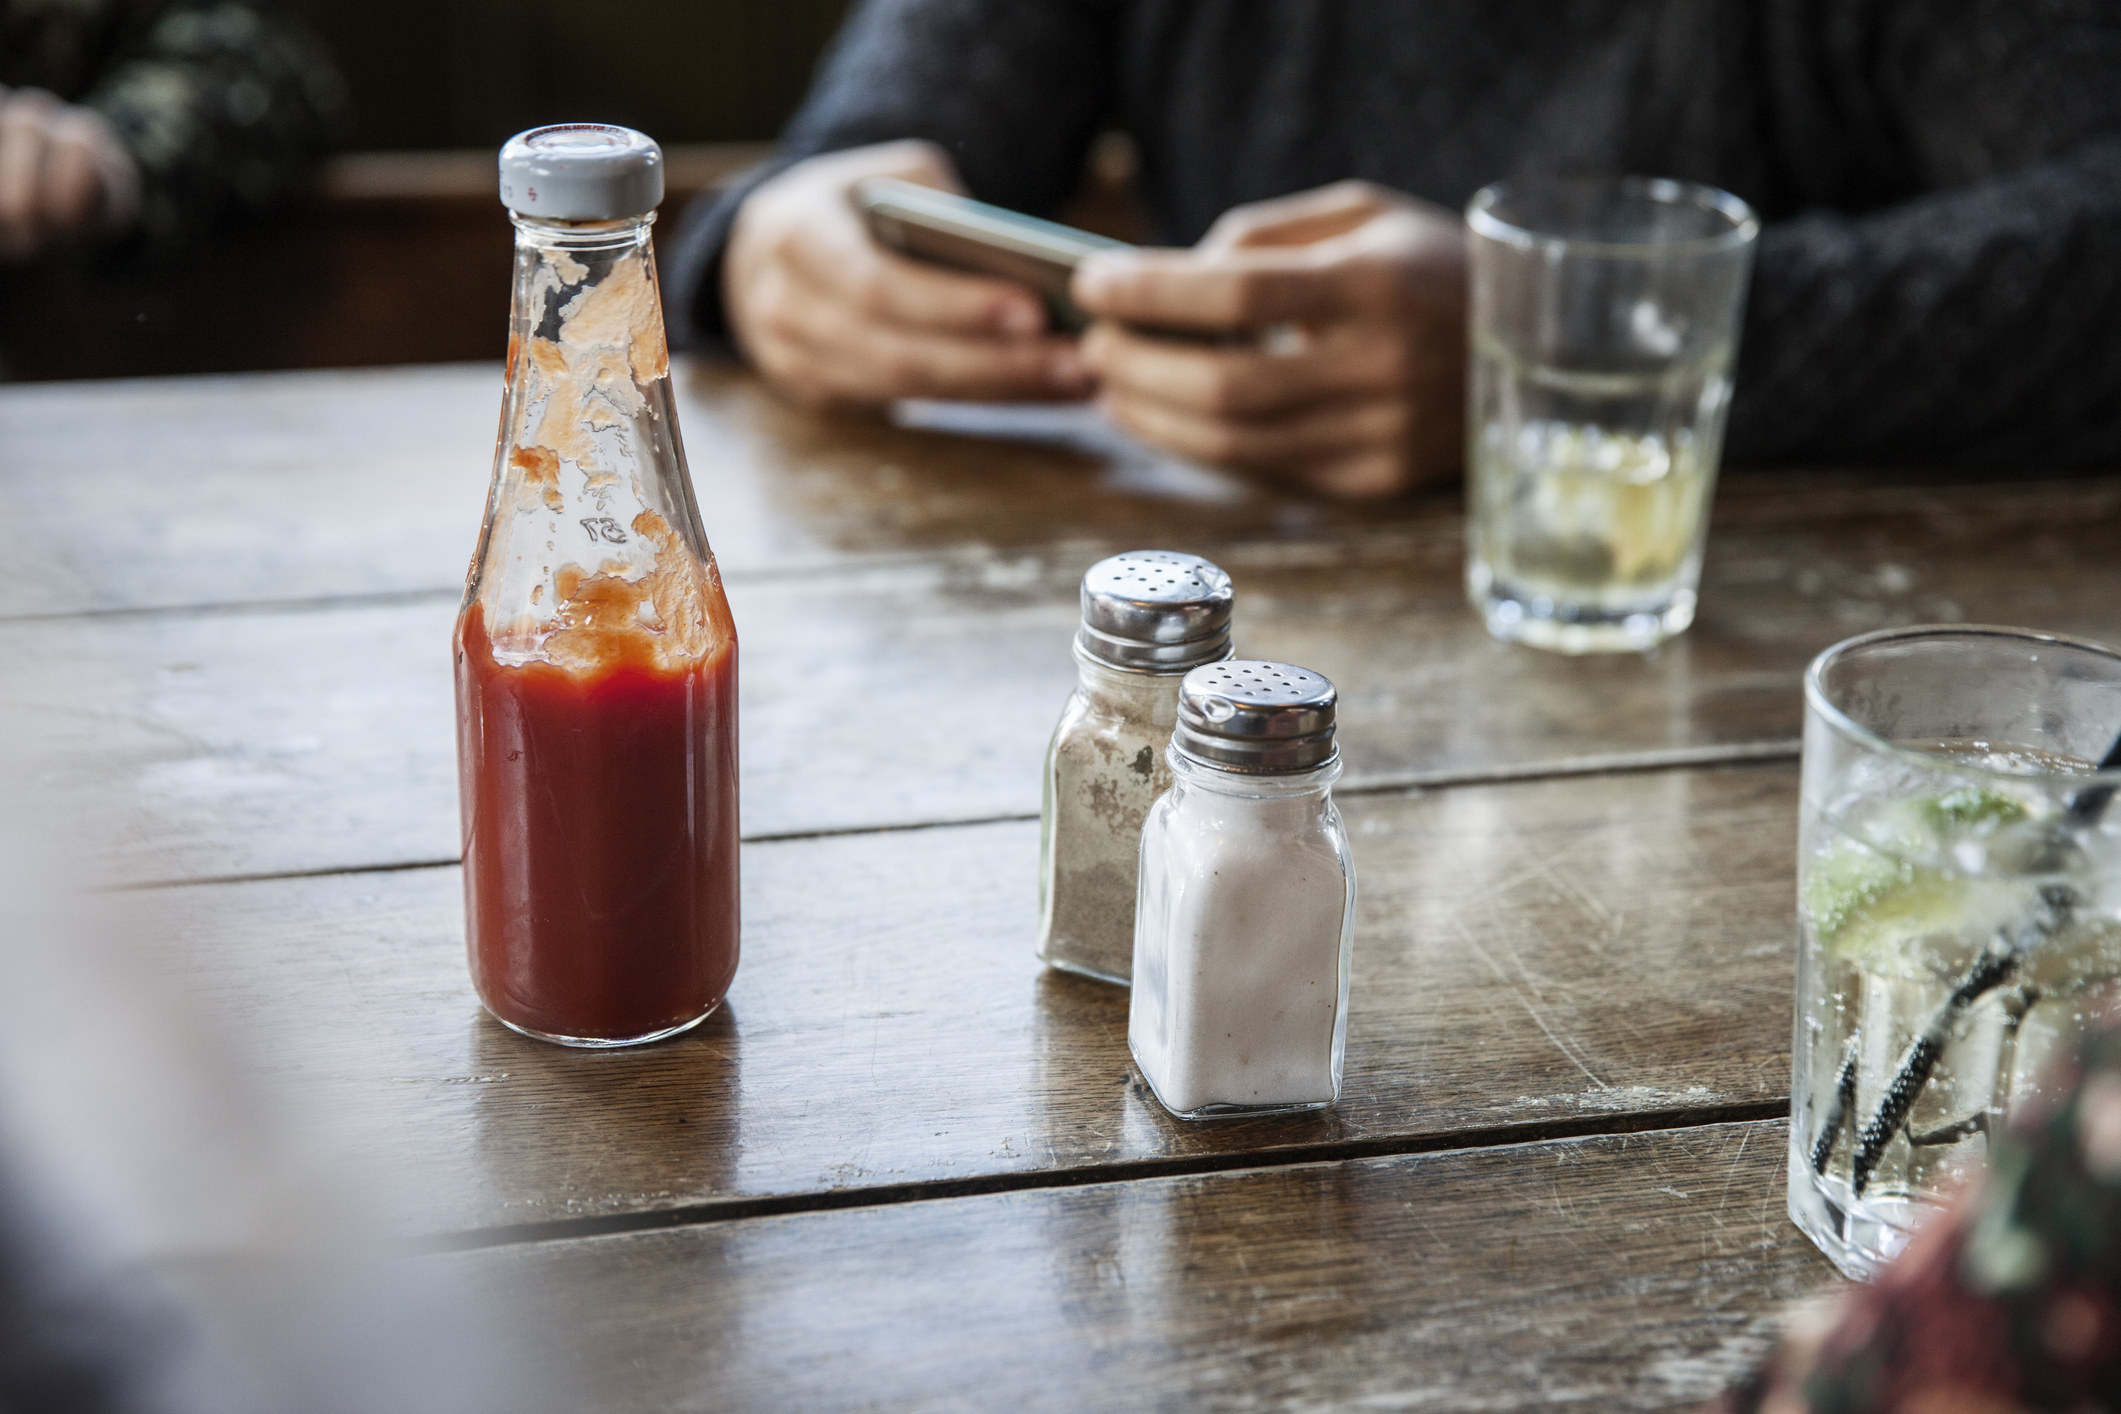 Ketchup and salt and pepper on a table